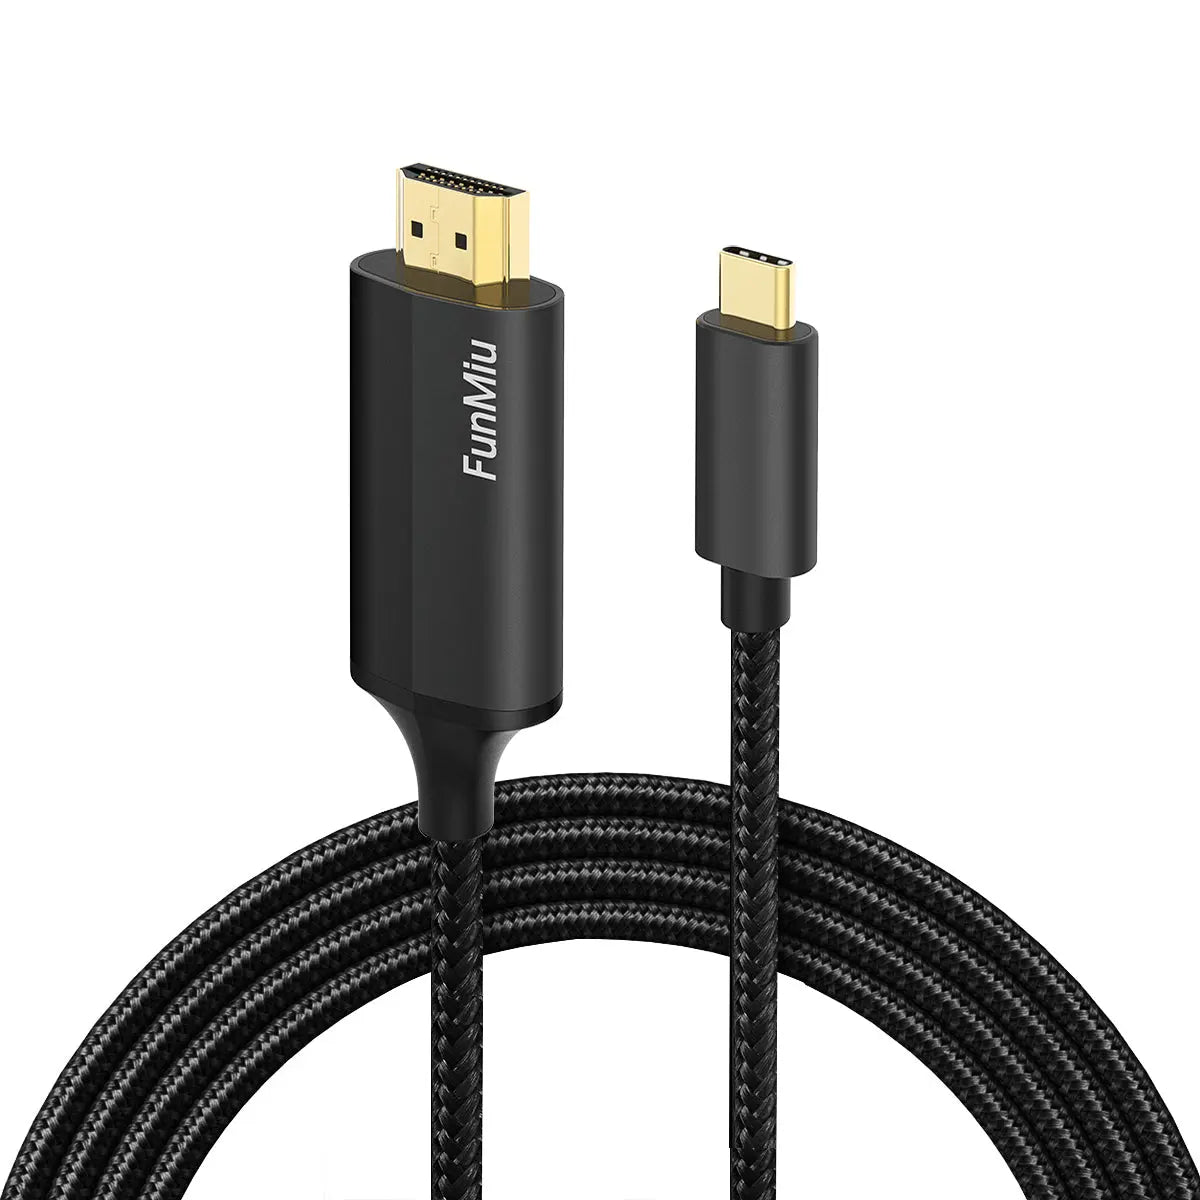 HDMI Cable To USB Type C [4K, High-Speed] - Lulaven